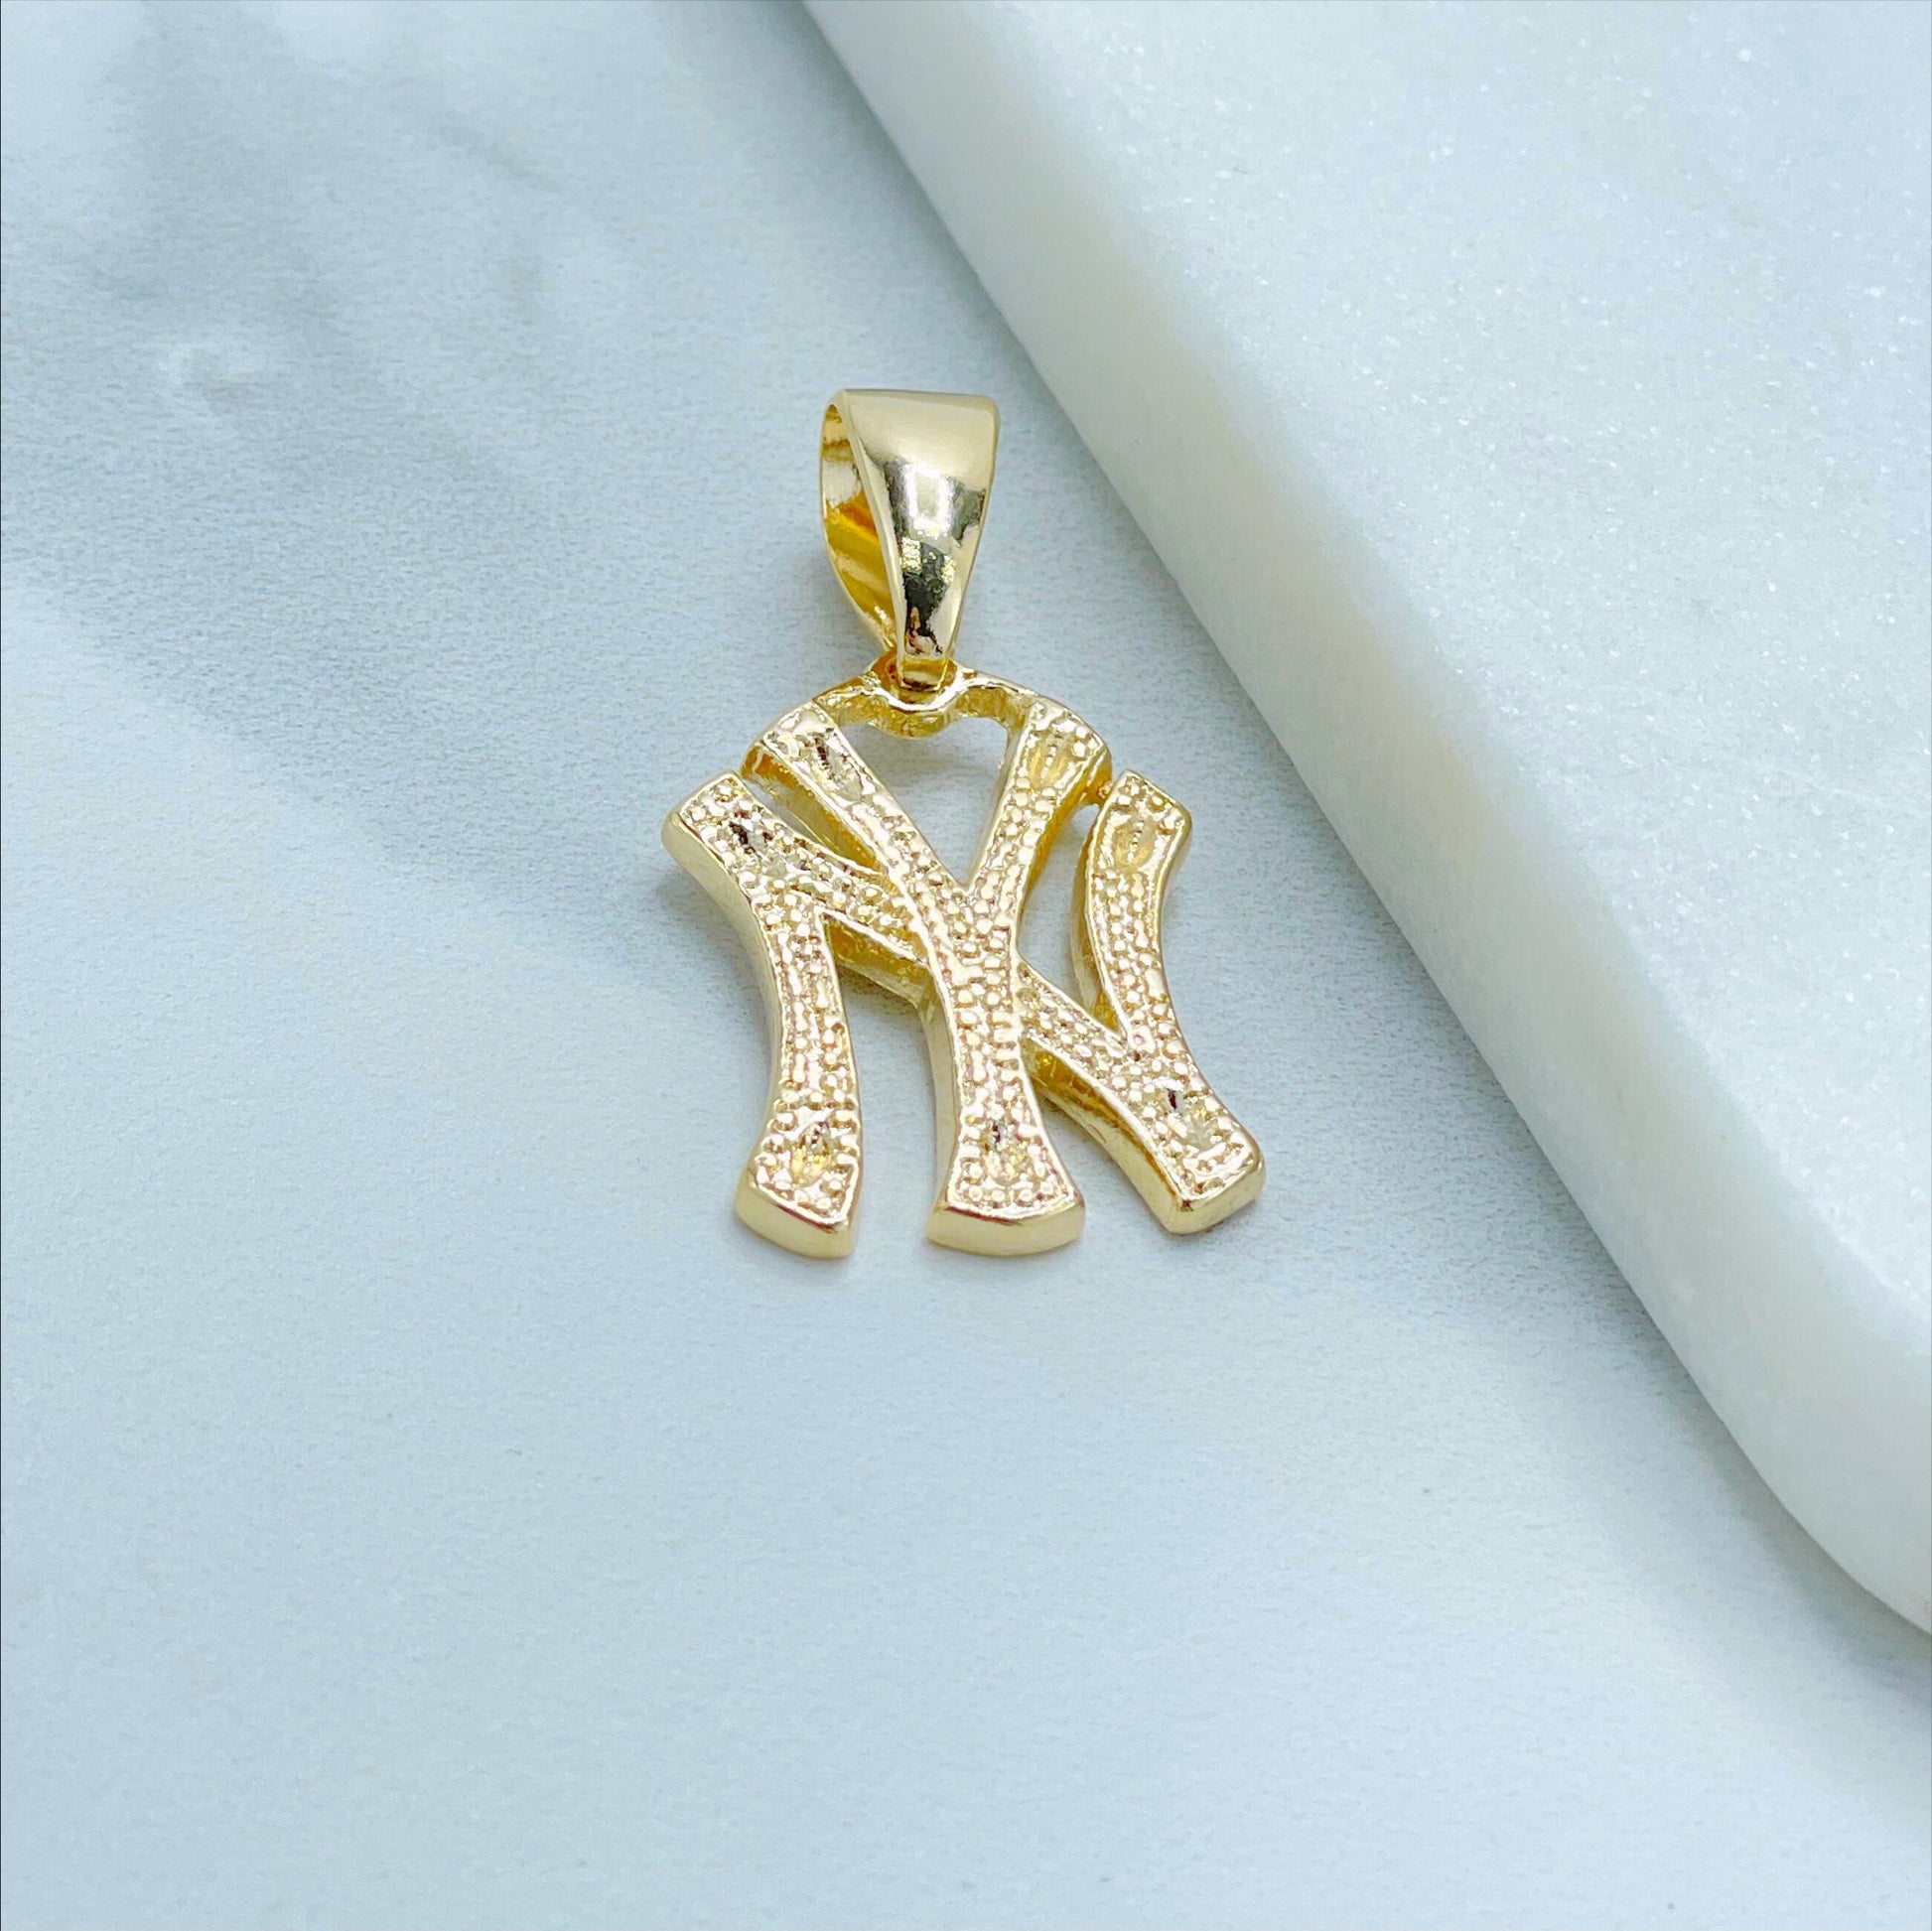 18k Gold Filled 1.3 inches NY Sport Team Charms Pendant Wholesale Jewelry Making Supplies